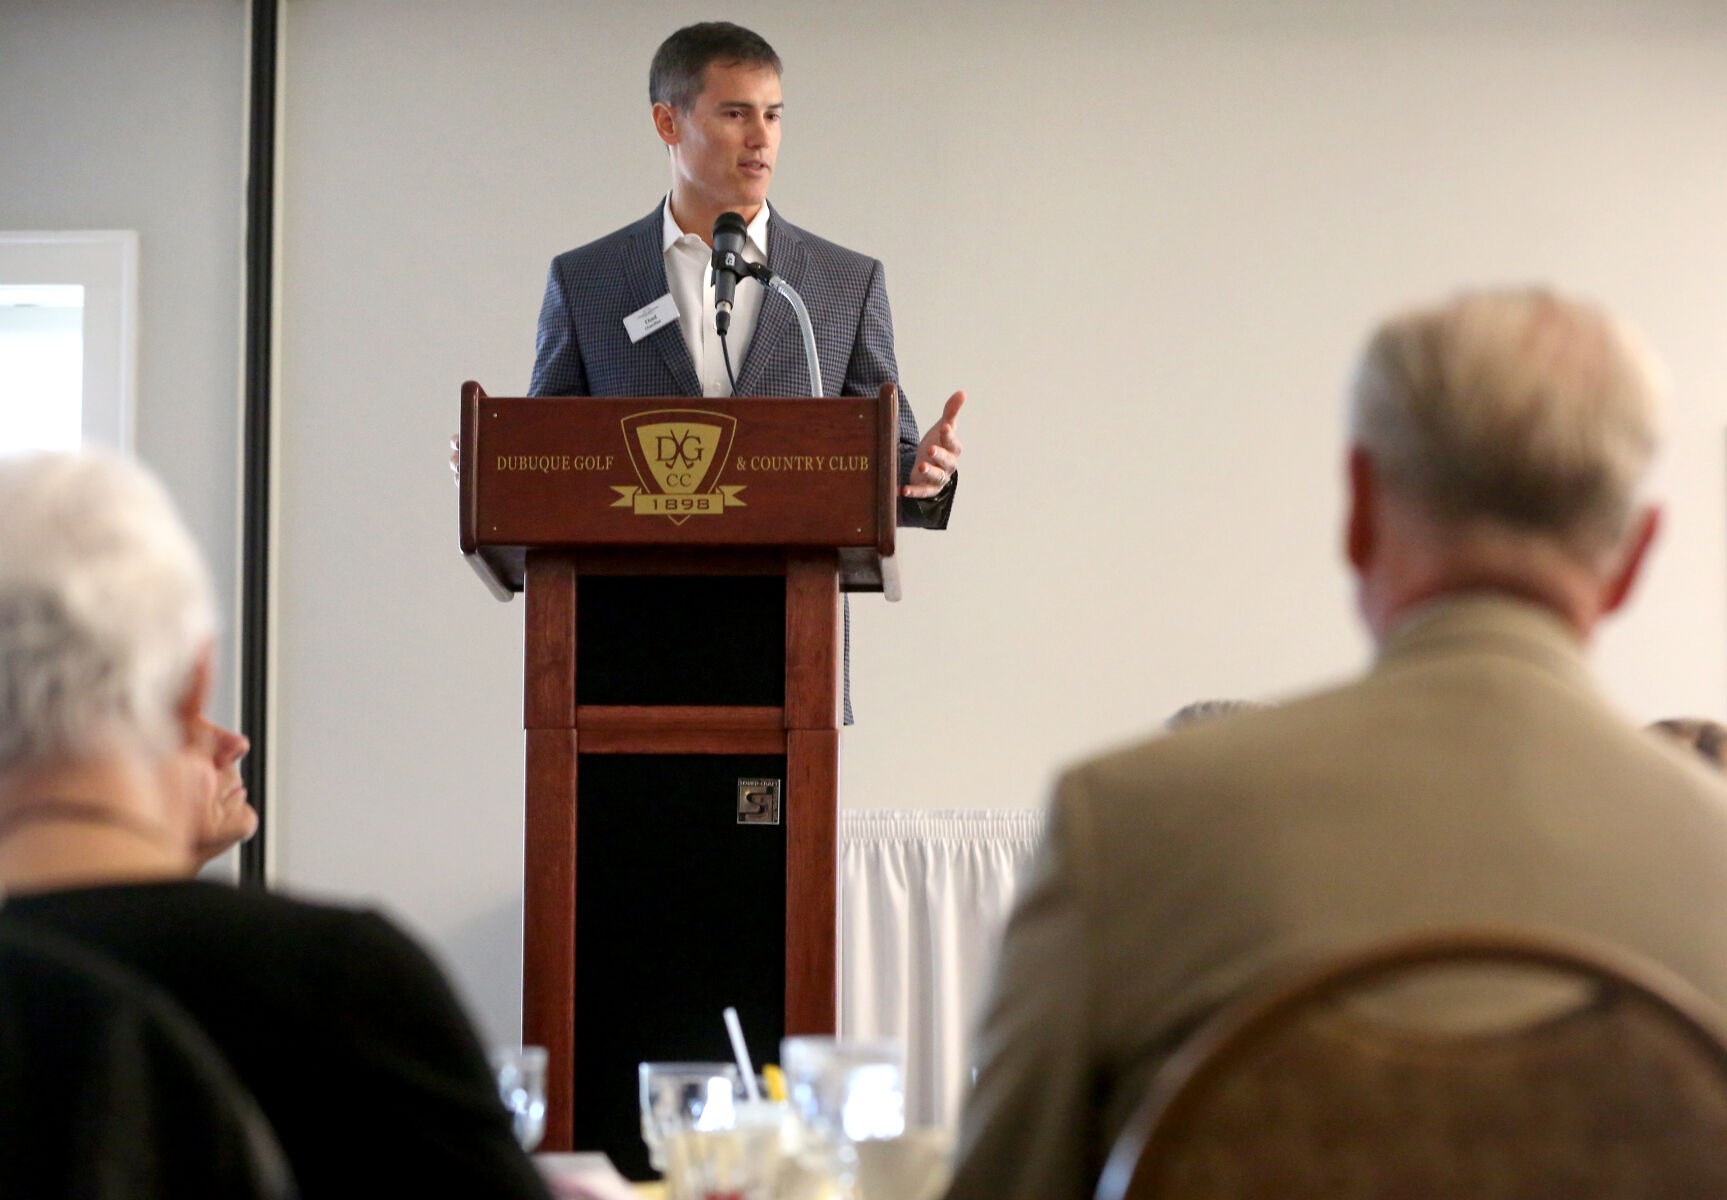 Chad Chandlee speaks during Community Foundation of Greater Dubuque’s annual luncheon in 2019.    PHOTO CREDIT: Jessica Reilly